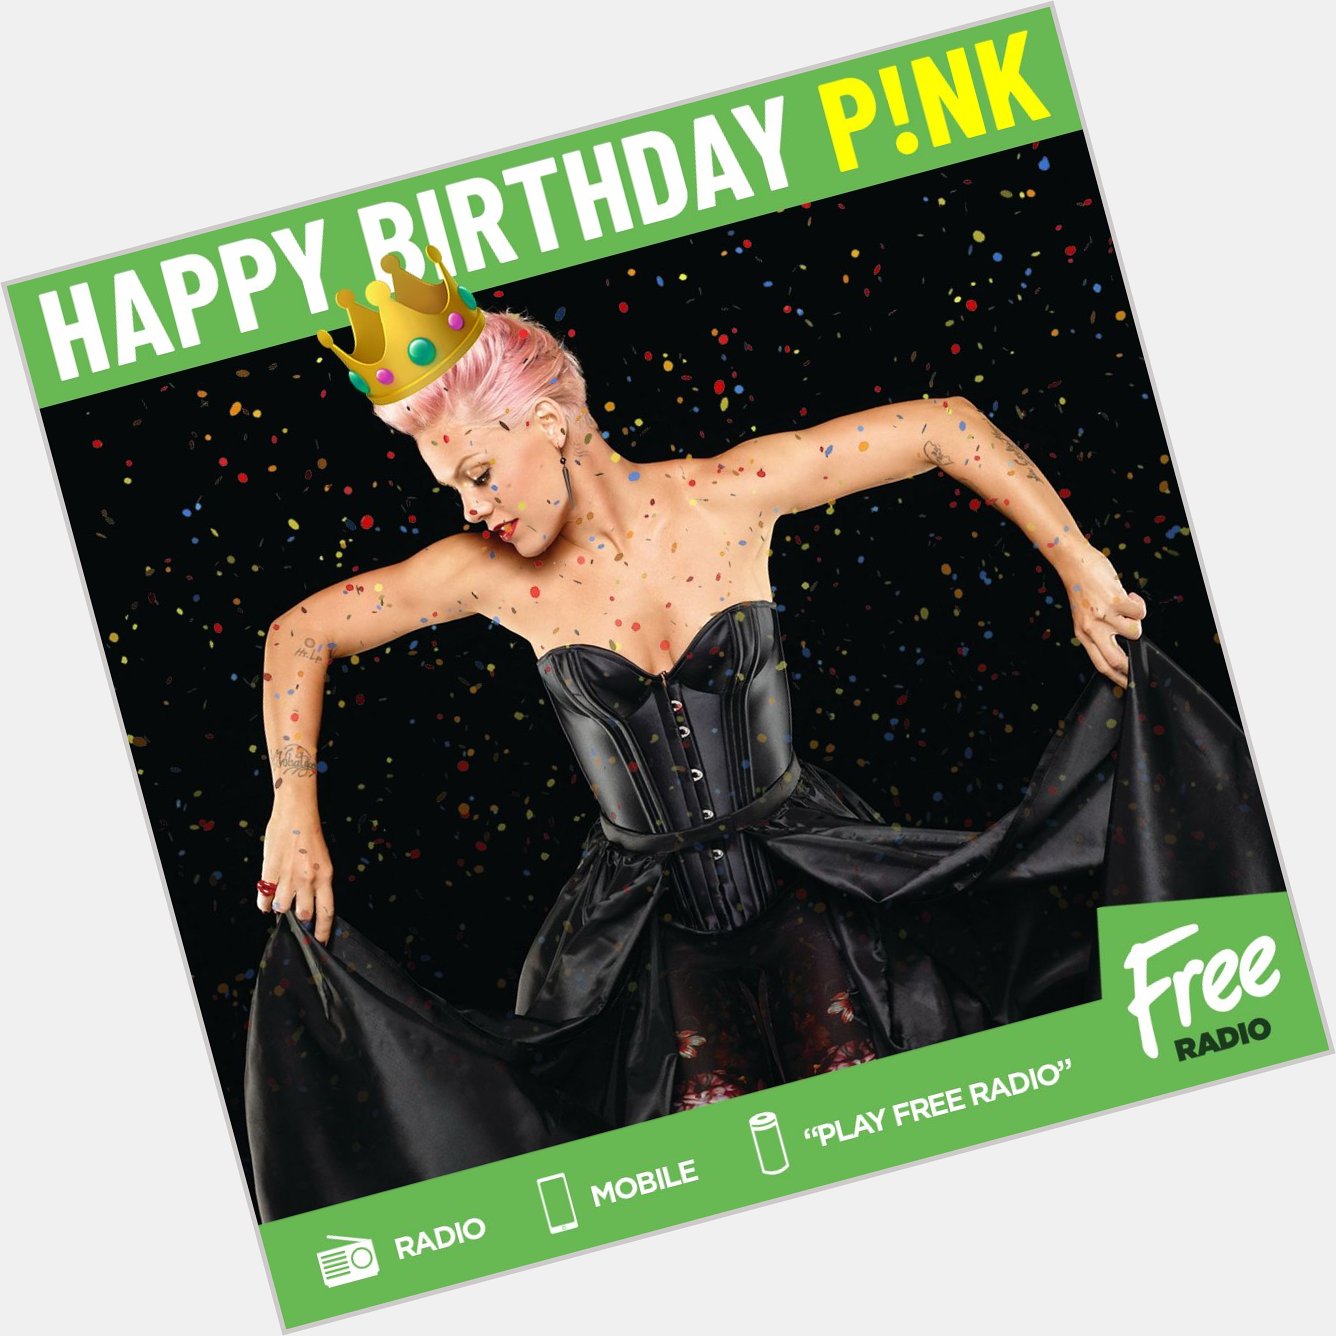 Happy Birthday P!nk! TRY to have a sensible night!  